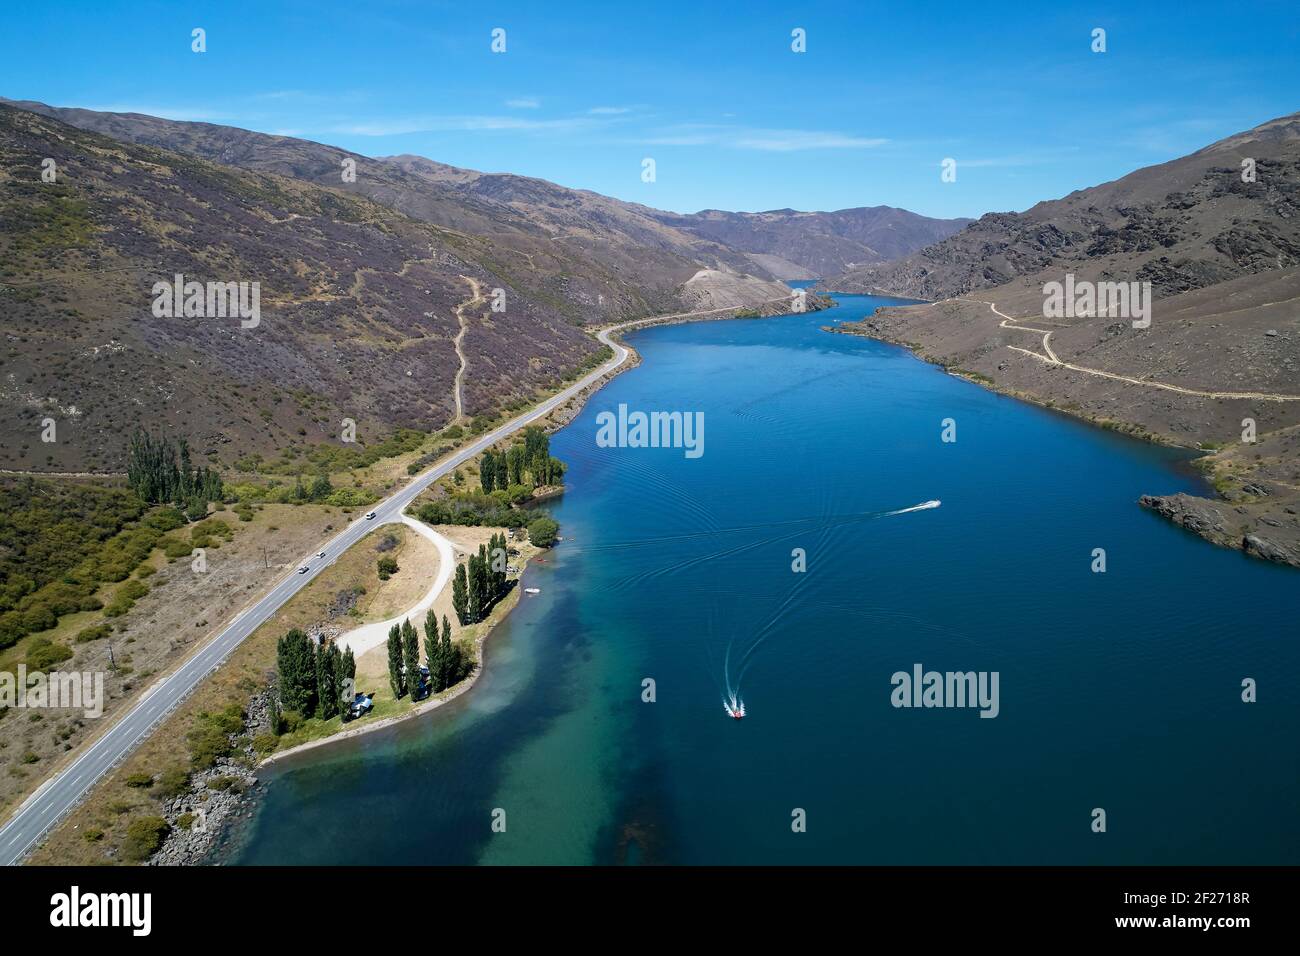 State Highway 8, Cromwell Gorge (links), Lake Dunstan Cycle Trail (rechts), und Lake Dunstan, nahe Cromwell, Central Otago, South Island, Neuseeland Stockfoto